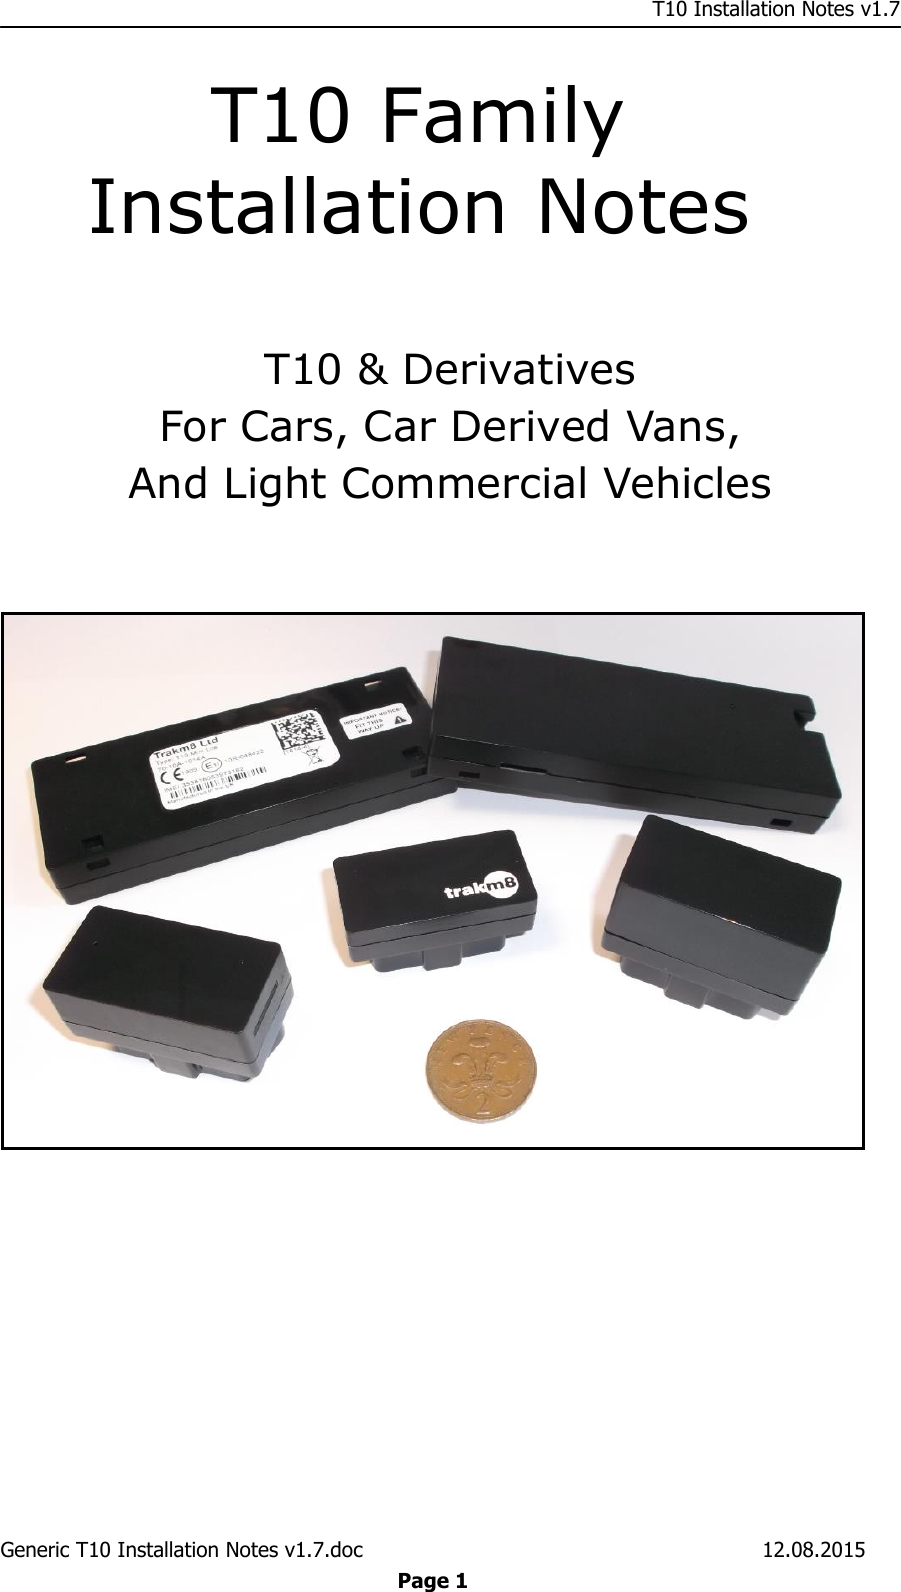     T10 Installation Notes v1.7 Generic T10 Installation Notes v1.7.doc    12.08.2015  Page 1 T10 Family Installation Notes  T10 &amp; Derivatives For Cars, Car Derived Vans, And Light Commercial Vehicles          